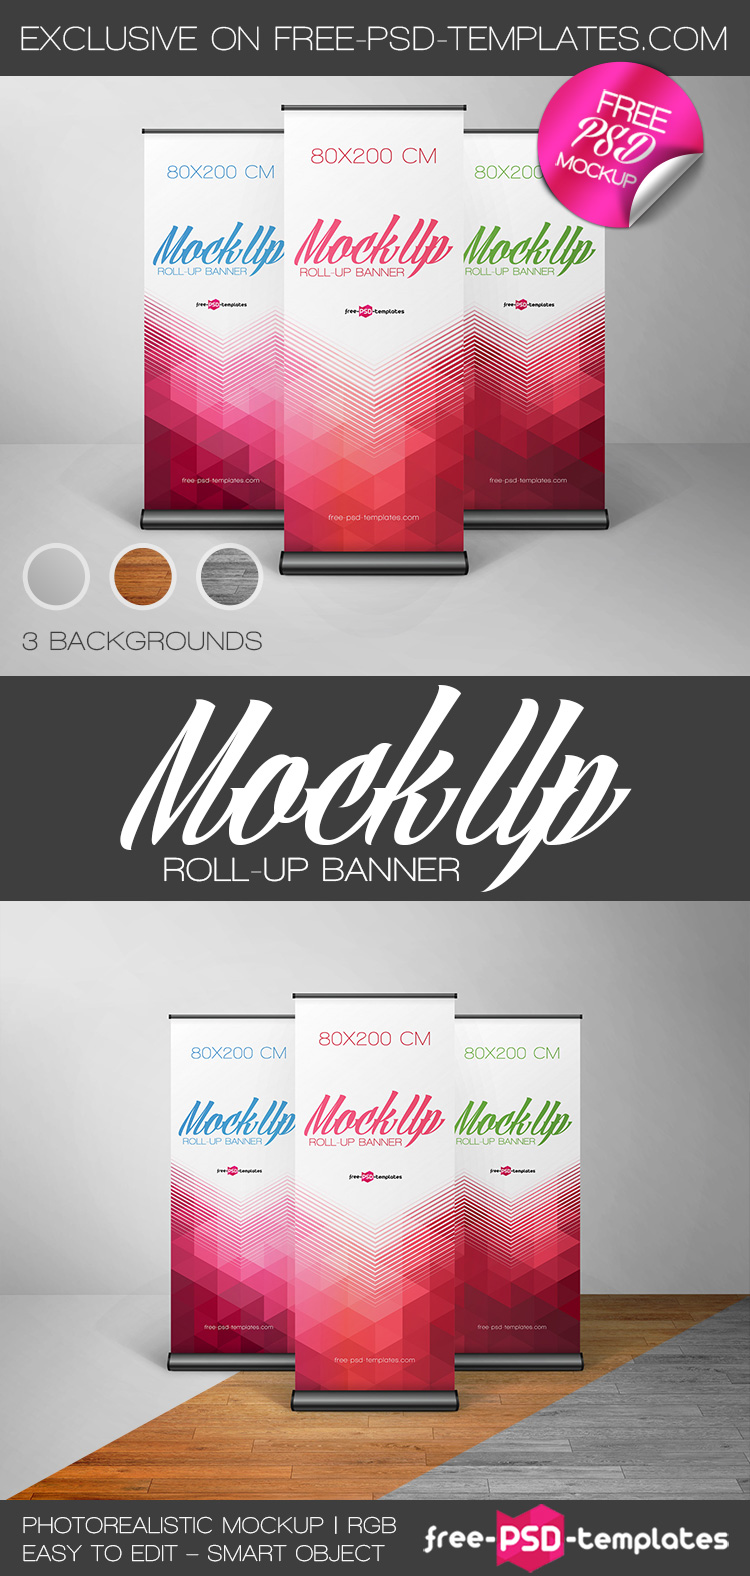 FREE ROLL-UP BANNER MOCK-UP IN PSD